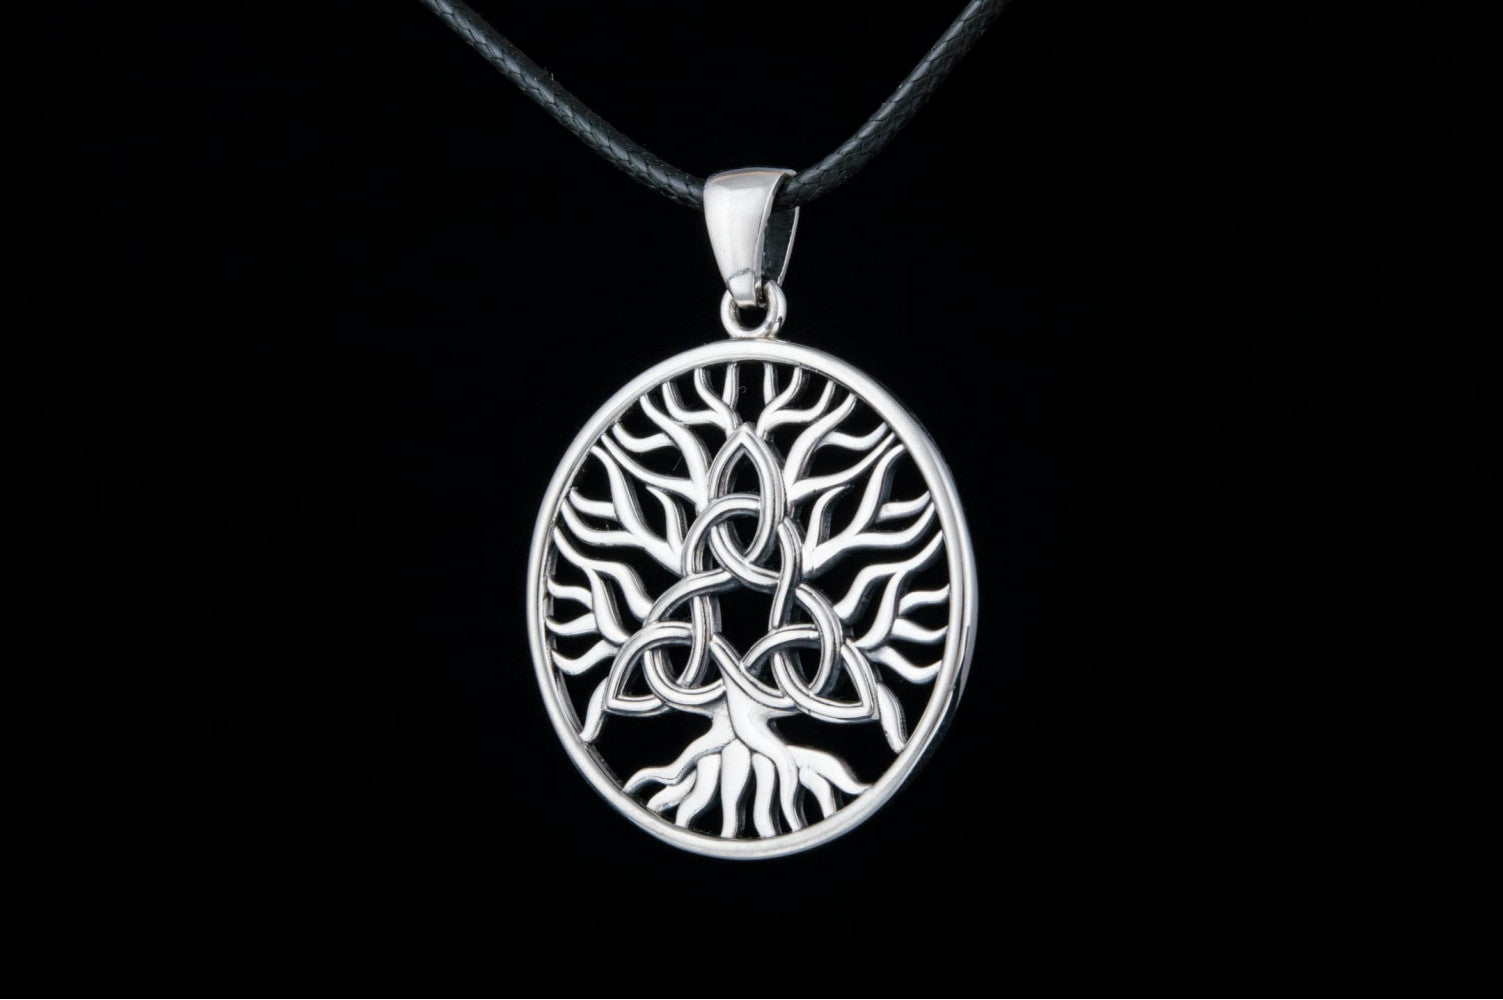 Yggdrasil with Triquetra Symbol Pendant Sterling Silver Viking Jewelry